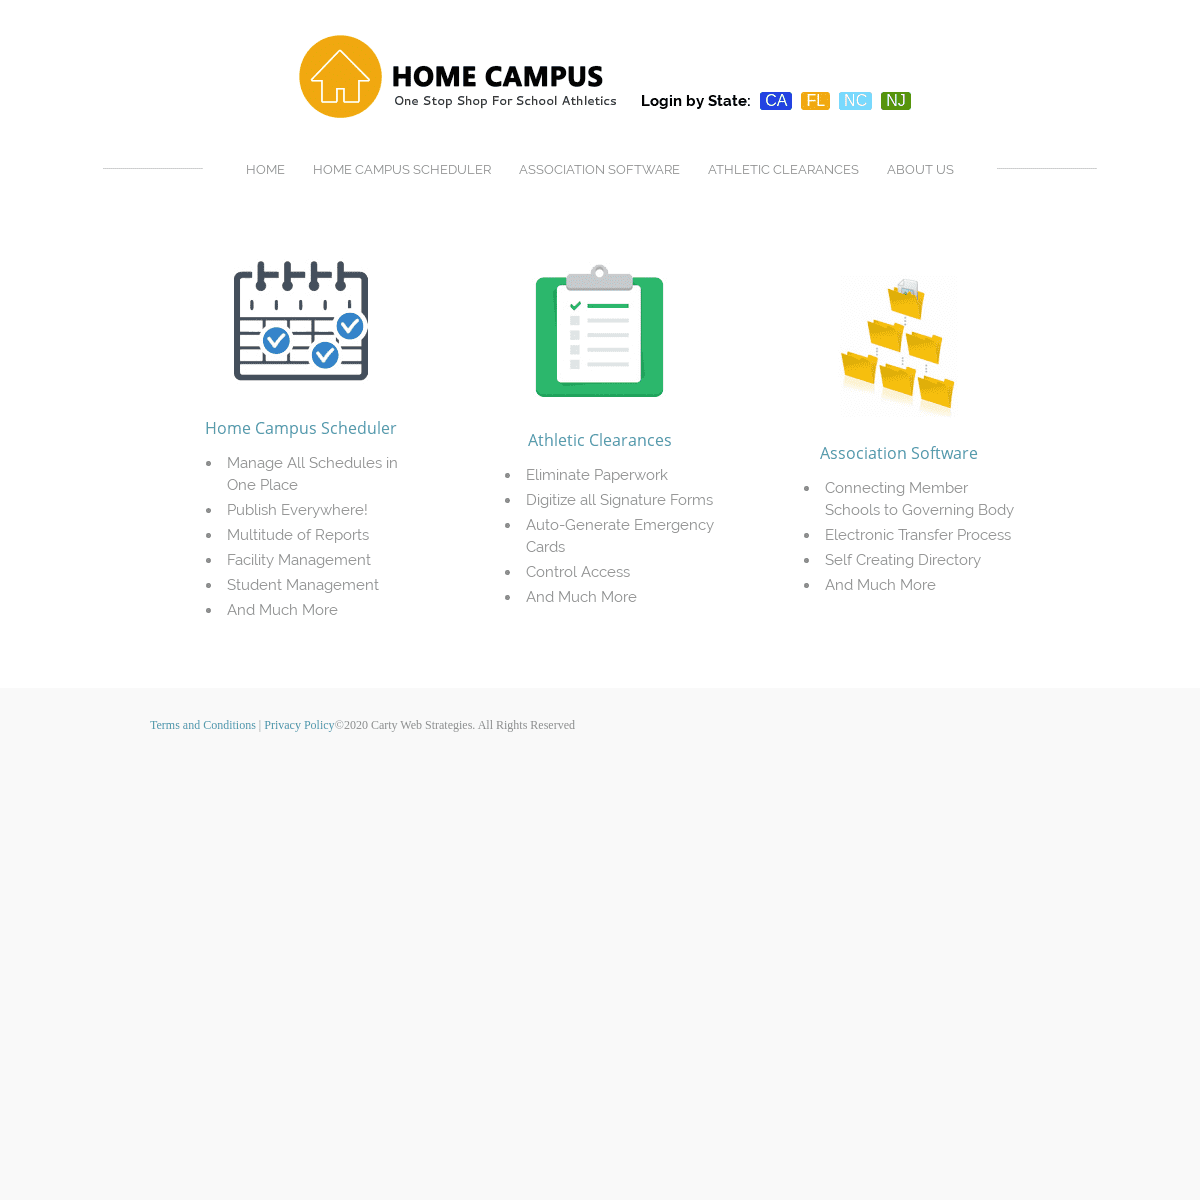 A complete backup of home-campus.com